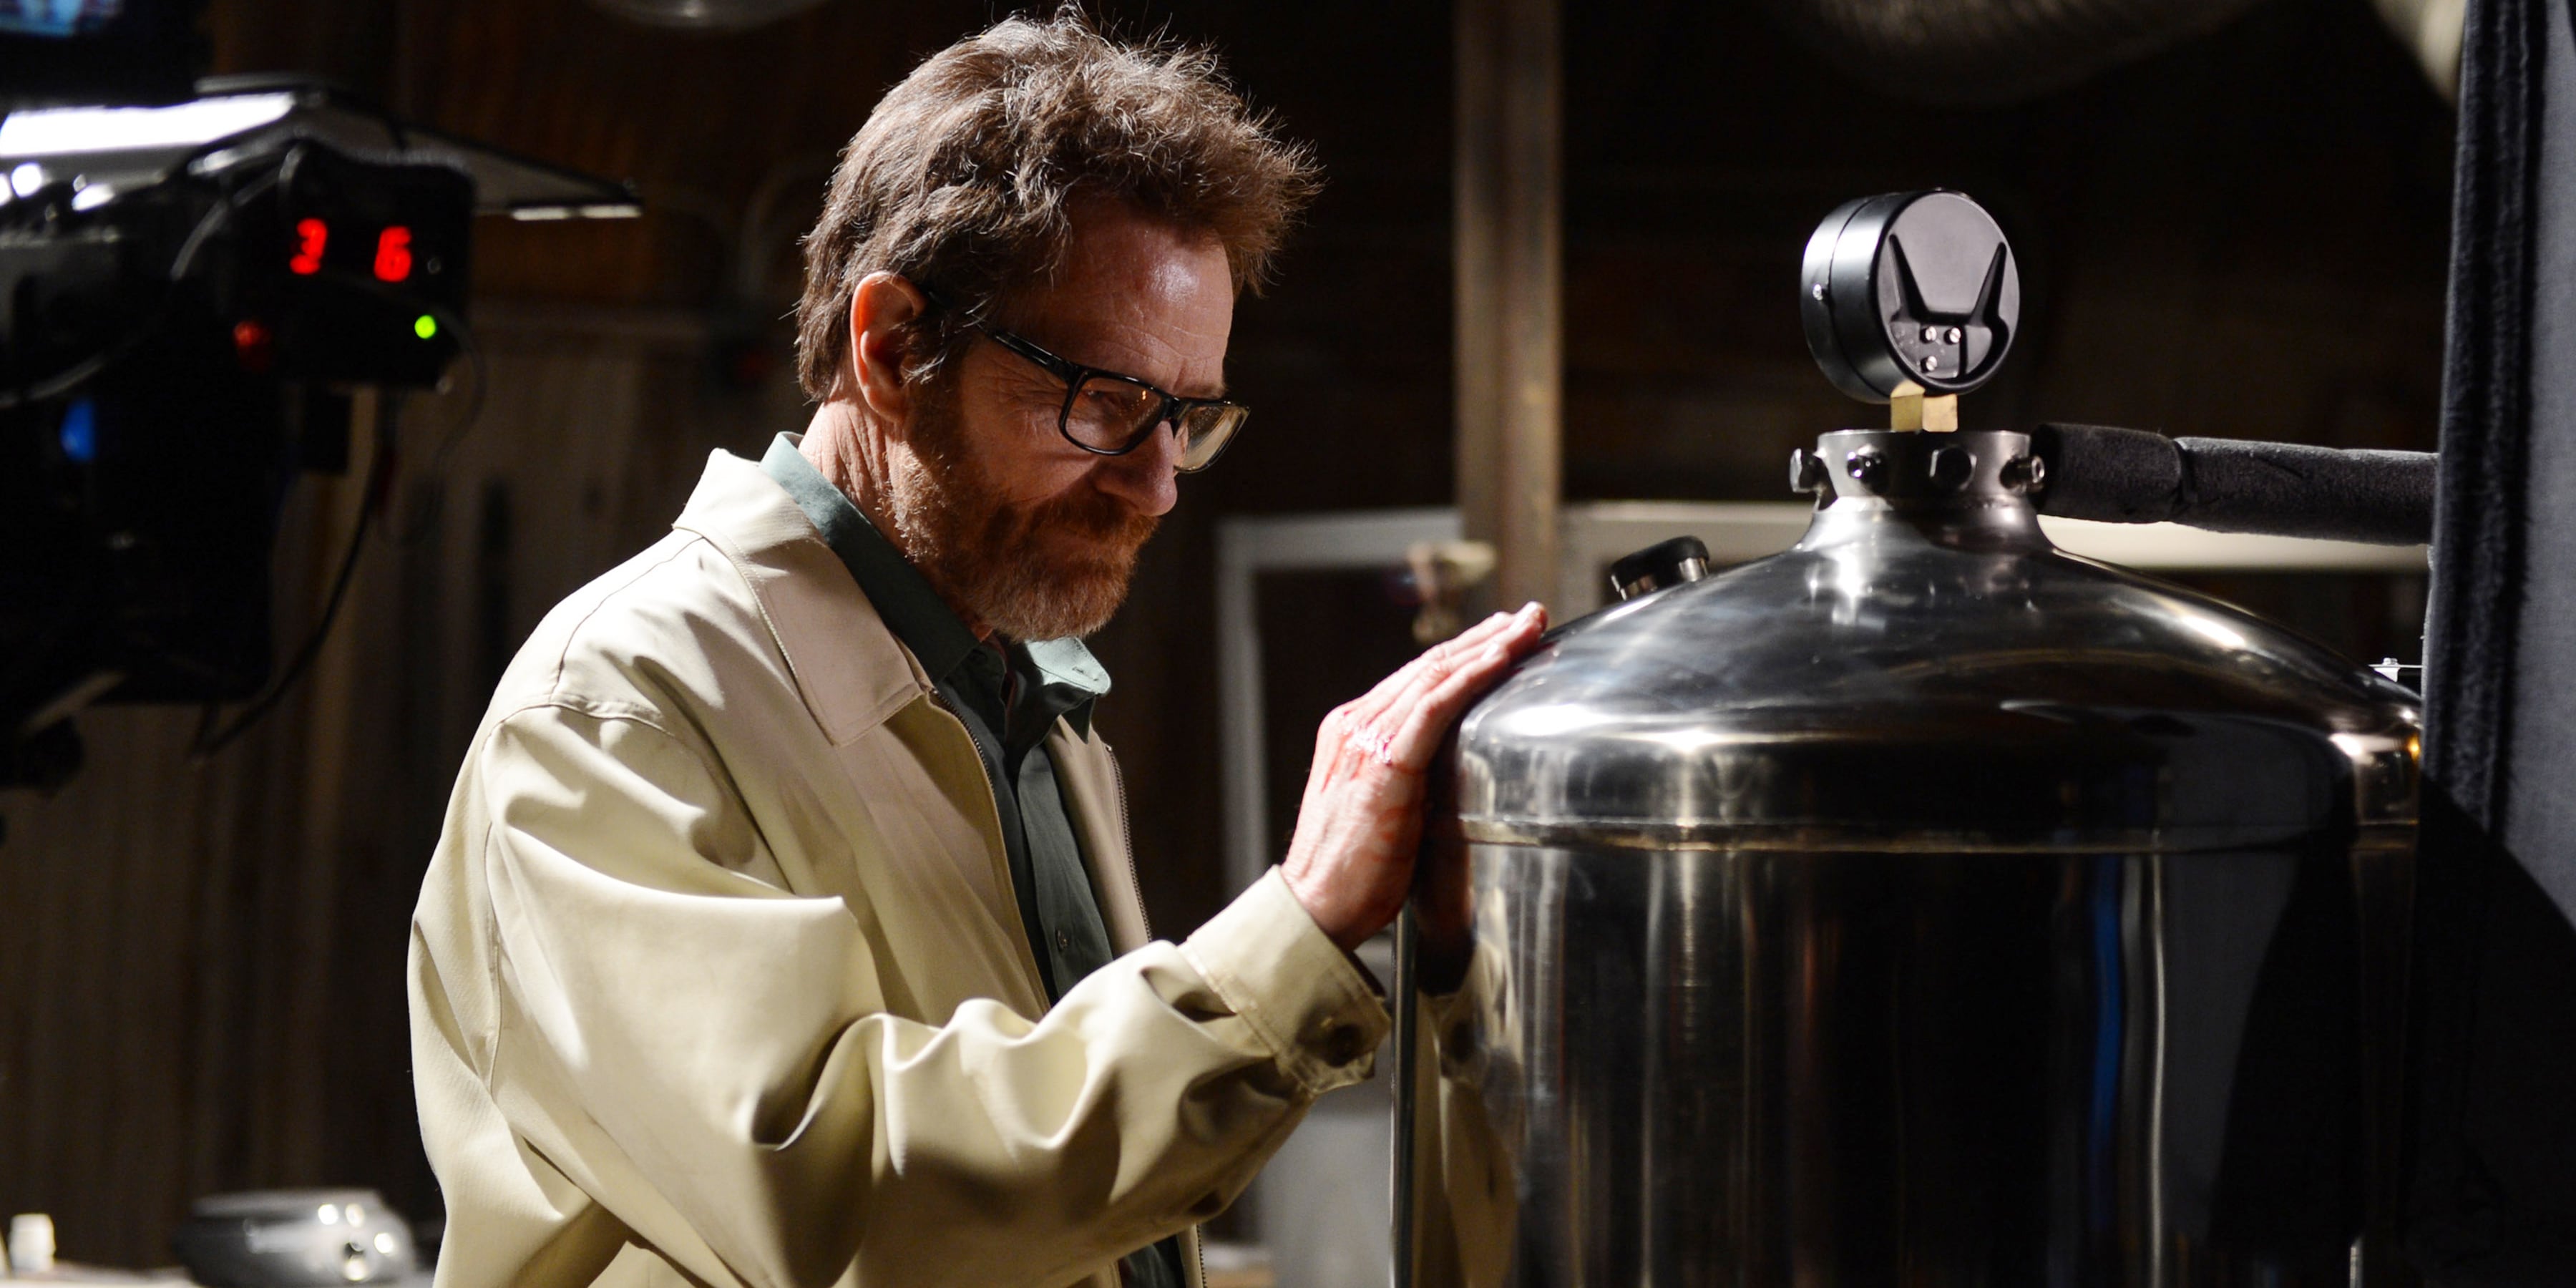 Breaking Bad recap: The key moments to remember before watching El Camino